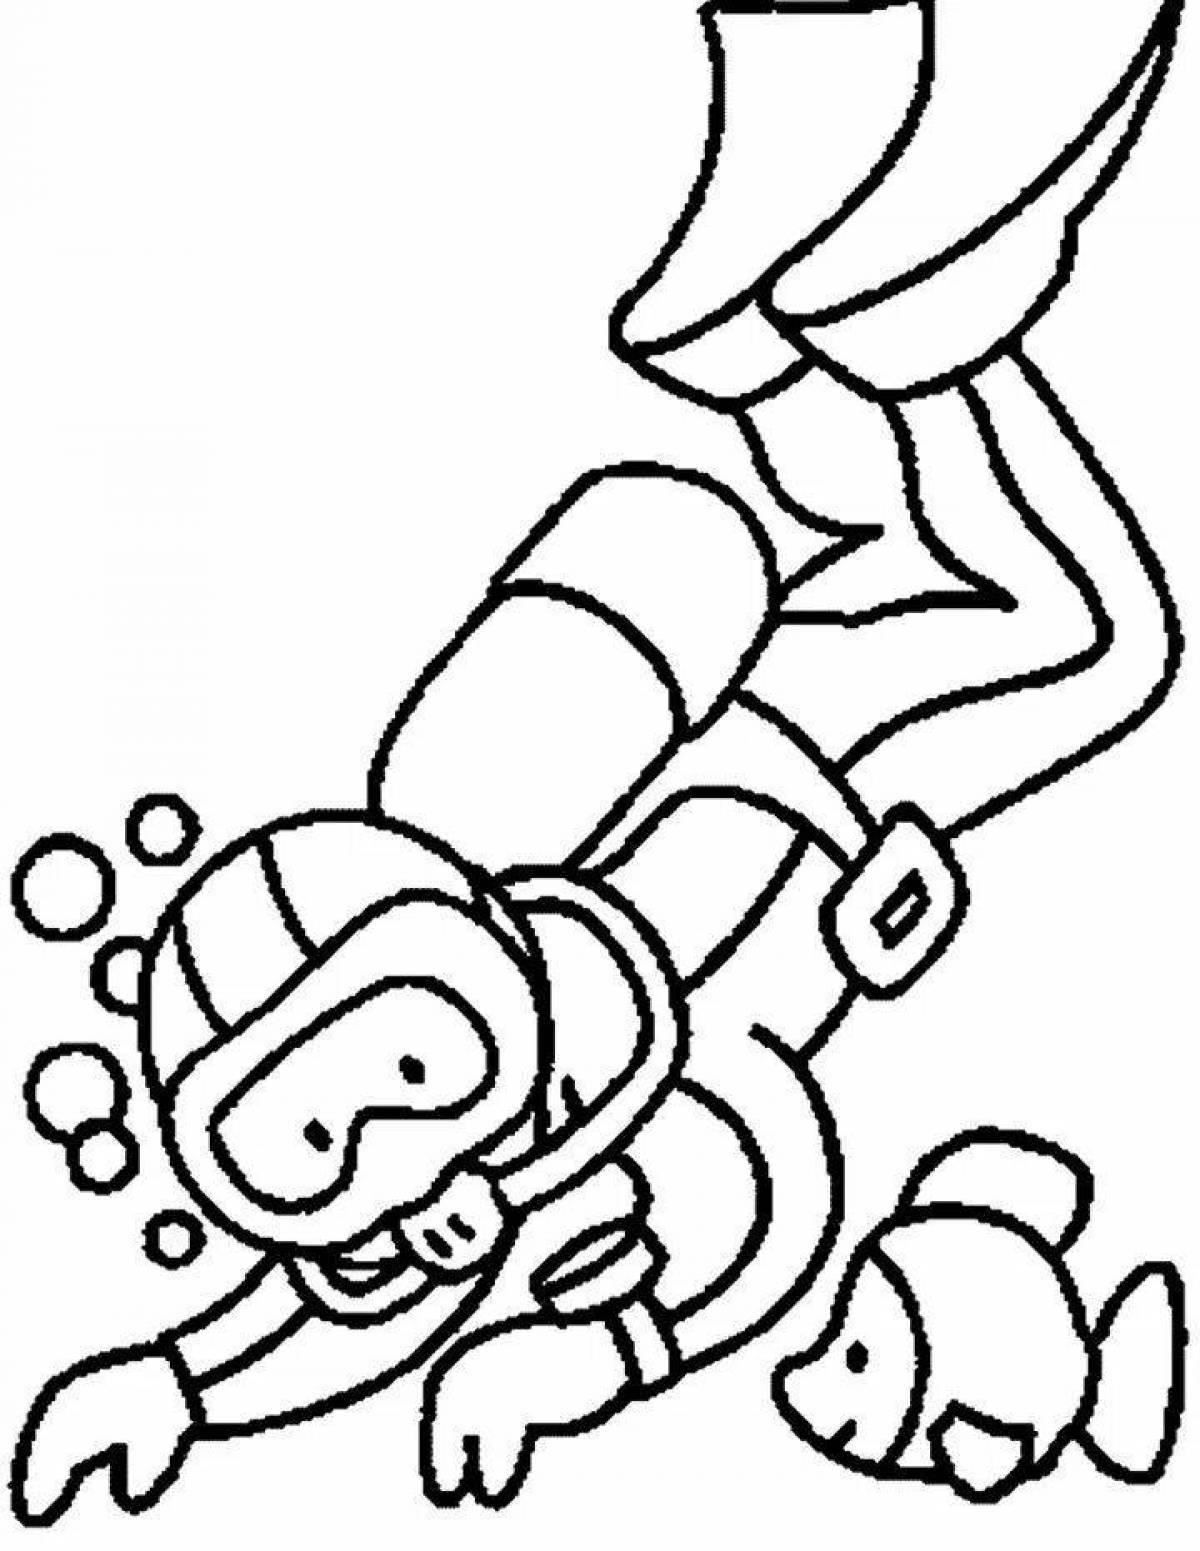 Coloring page energetic diver